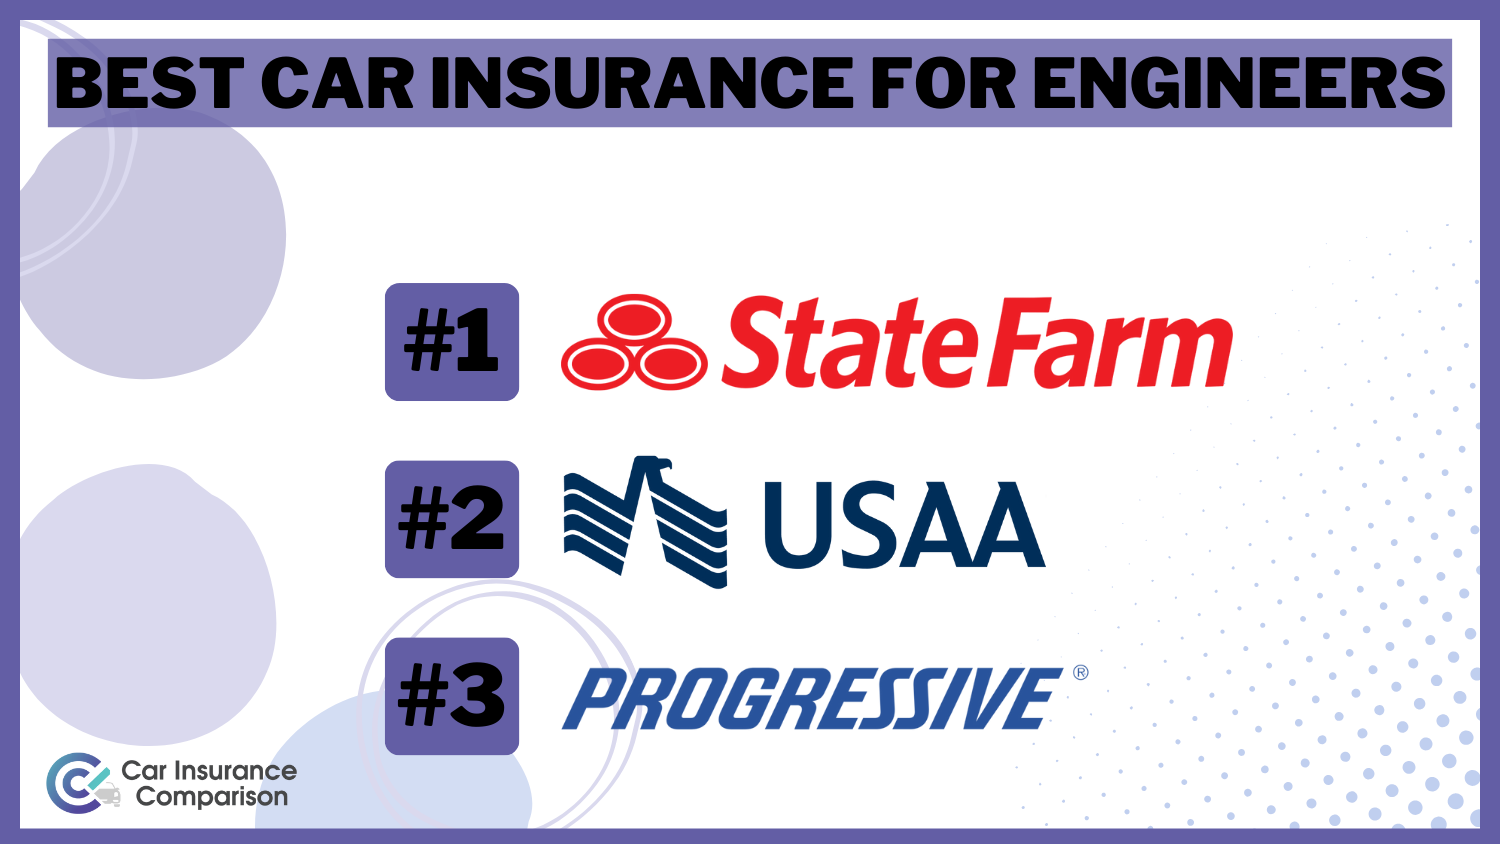 Best Car Insurance for Professional Engineer: State Farm, USAA, and Progressive